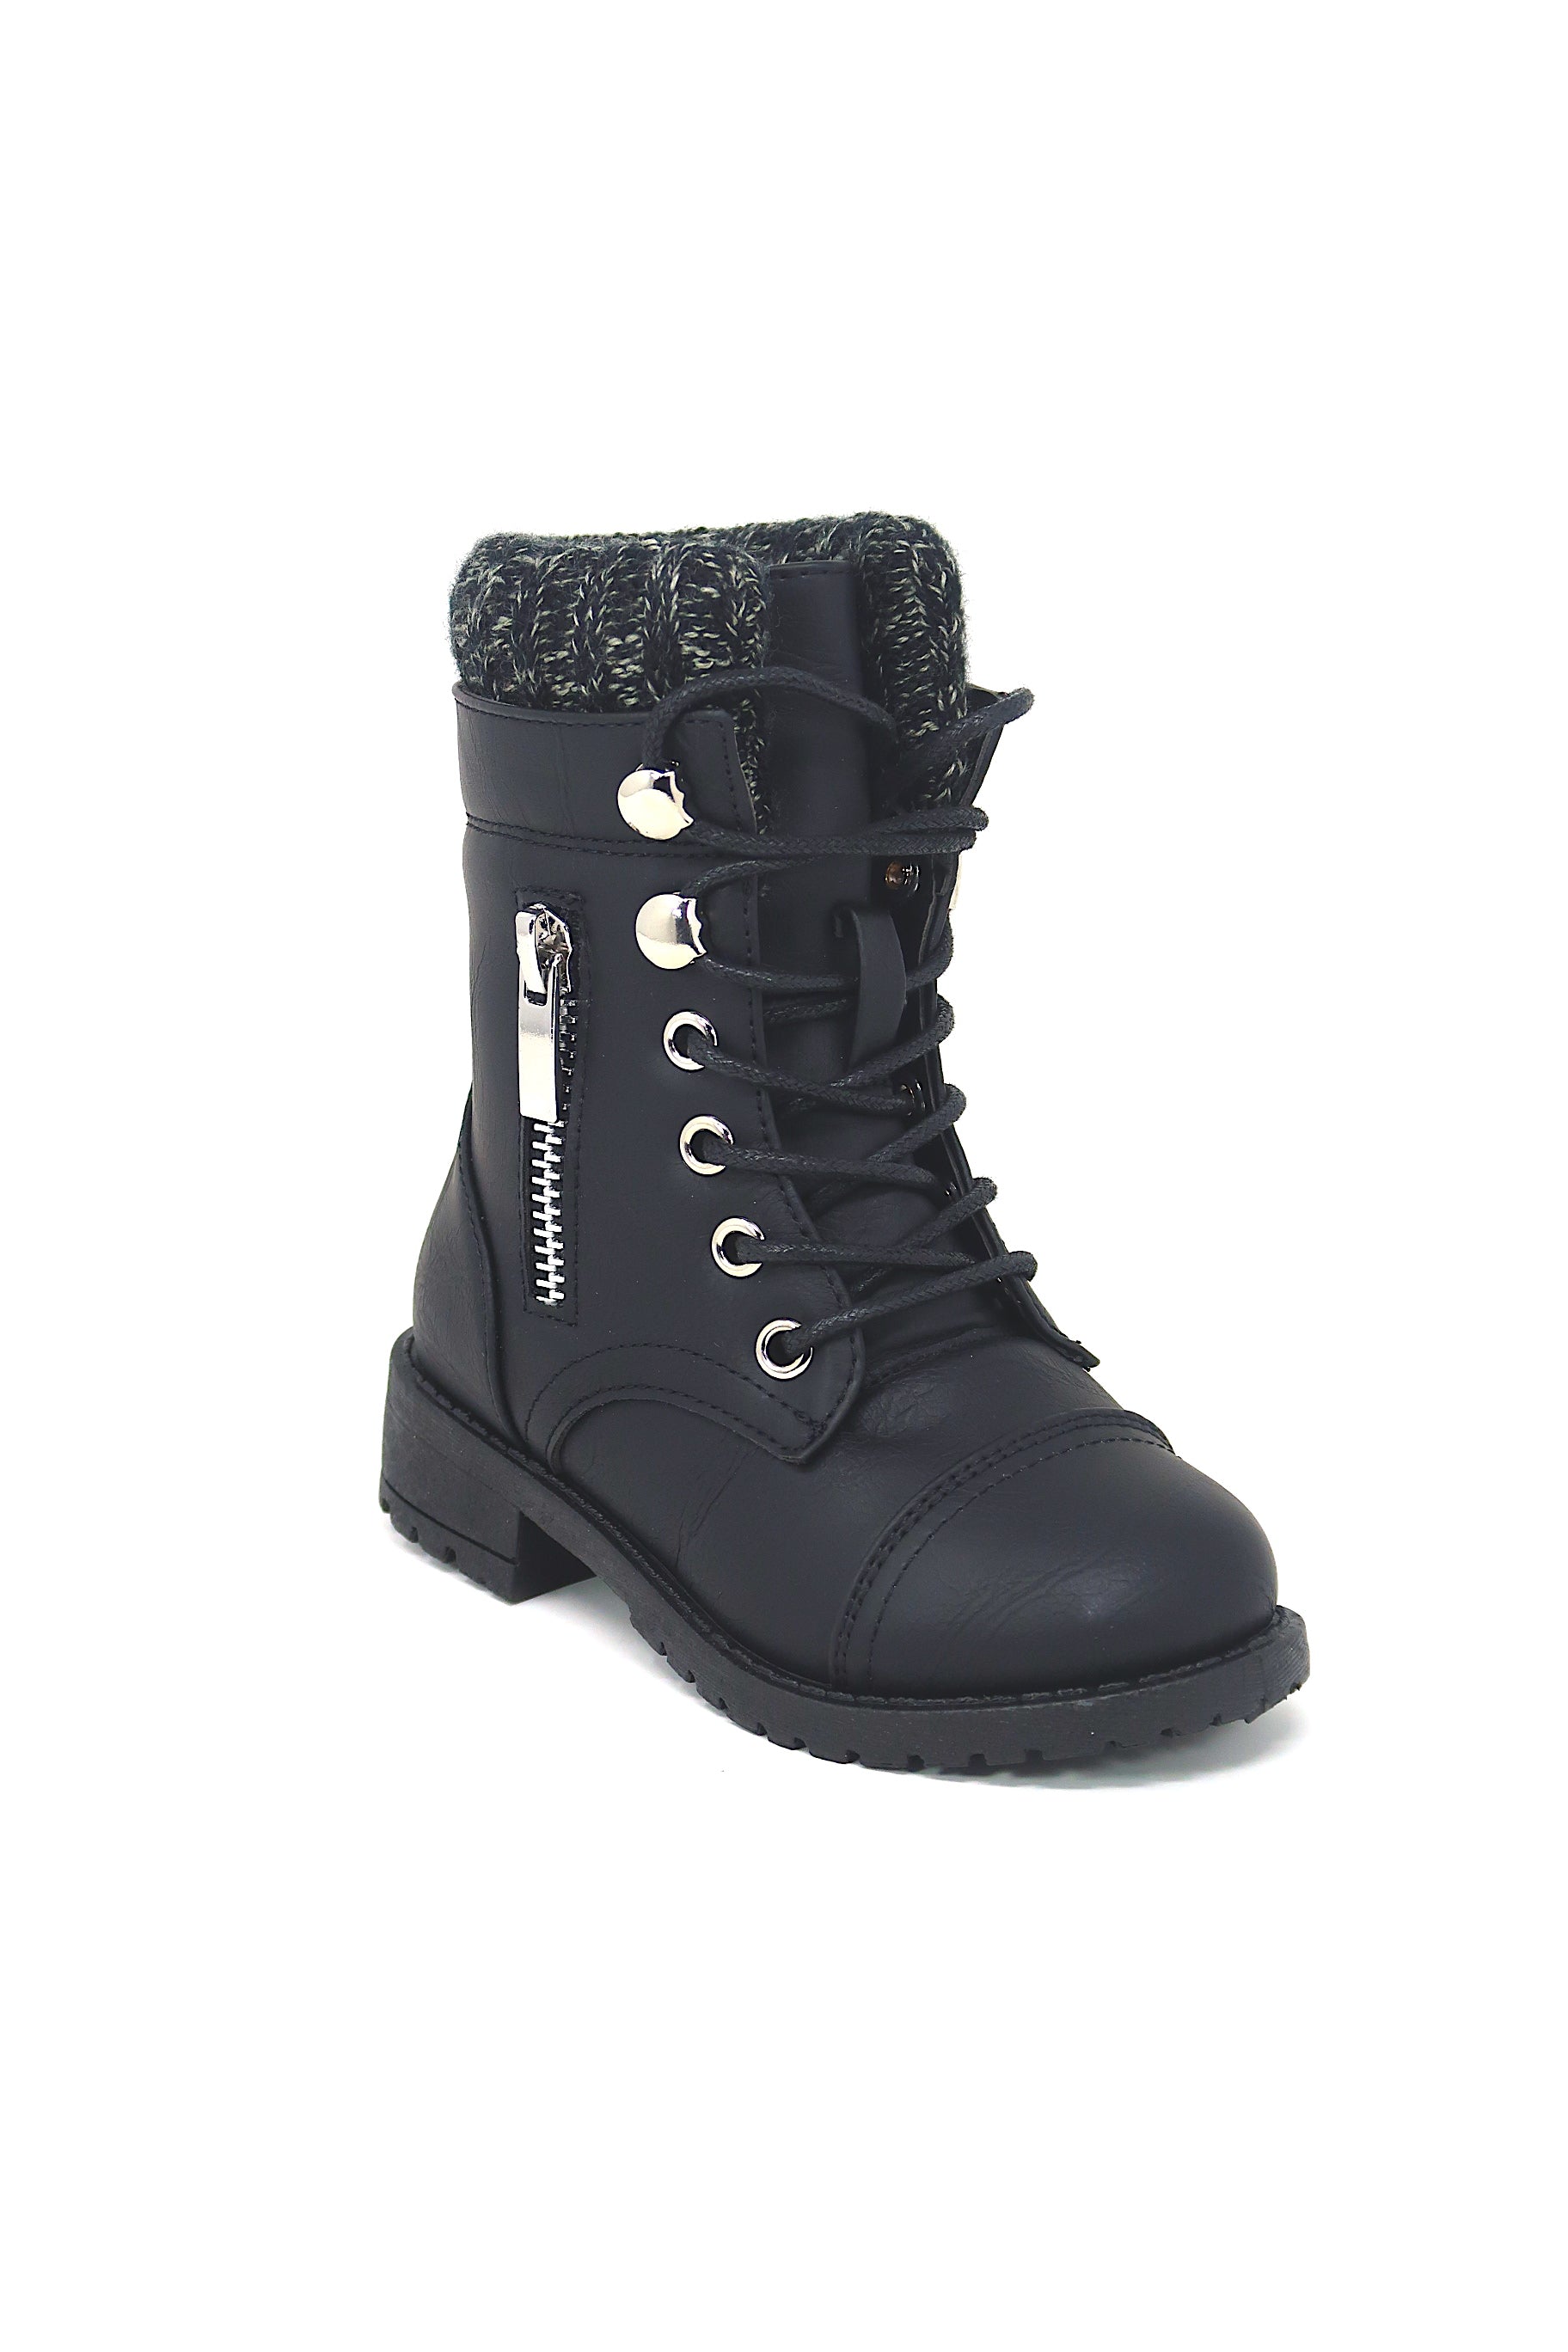 Amazon.com | Perphy Platform Ankle Boots Lace Up Chunky Heel Black Combat  Boots for Women 6 | Ankle & Bootie